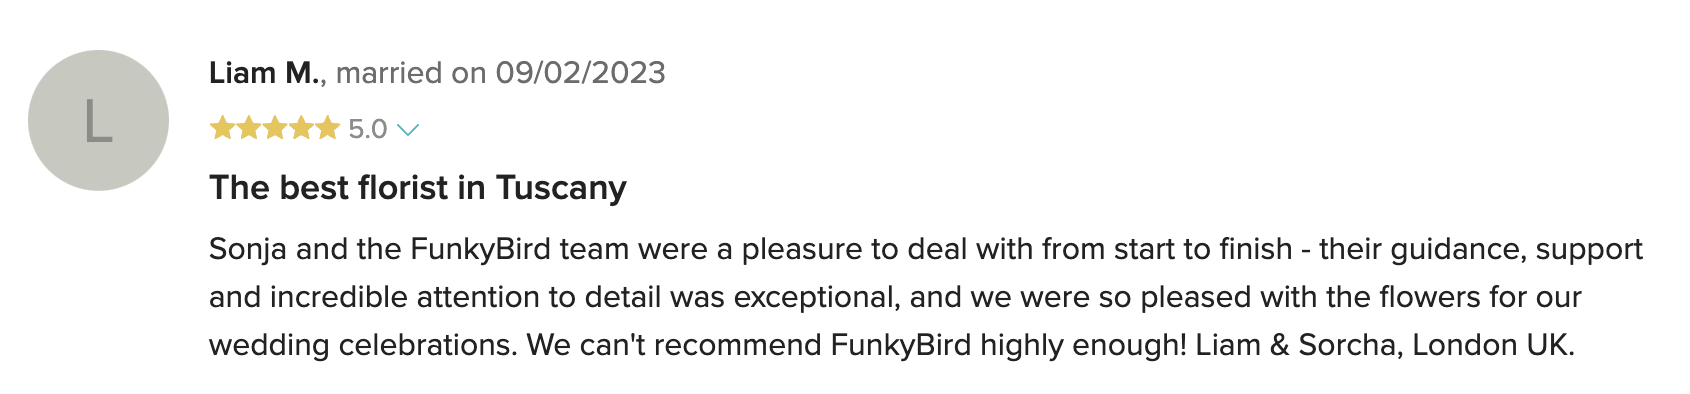 Review funkybird florist in florence tuscany trouwen in toscane 2.png